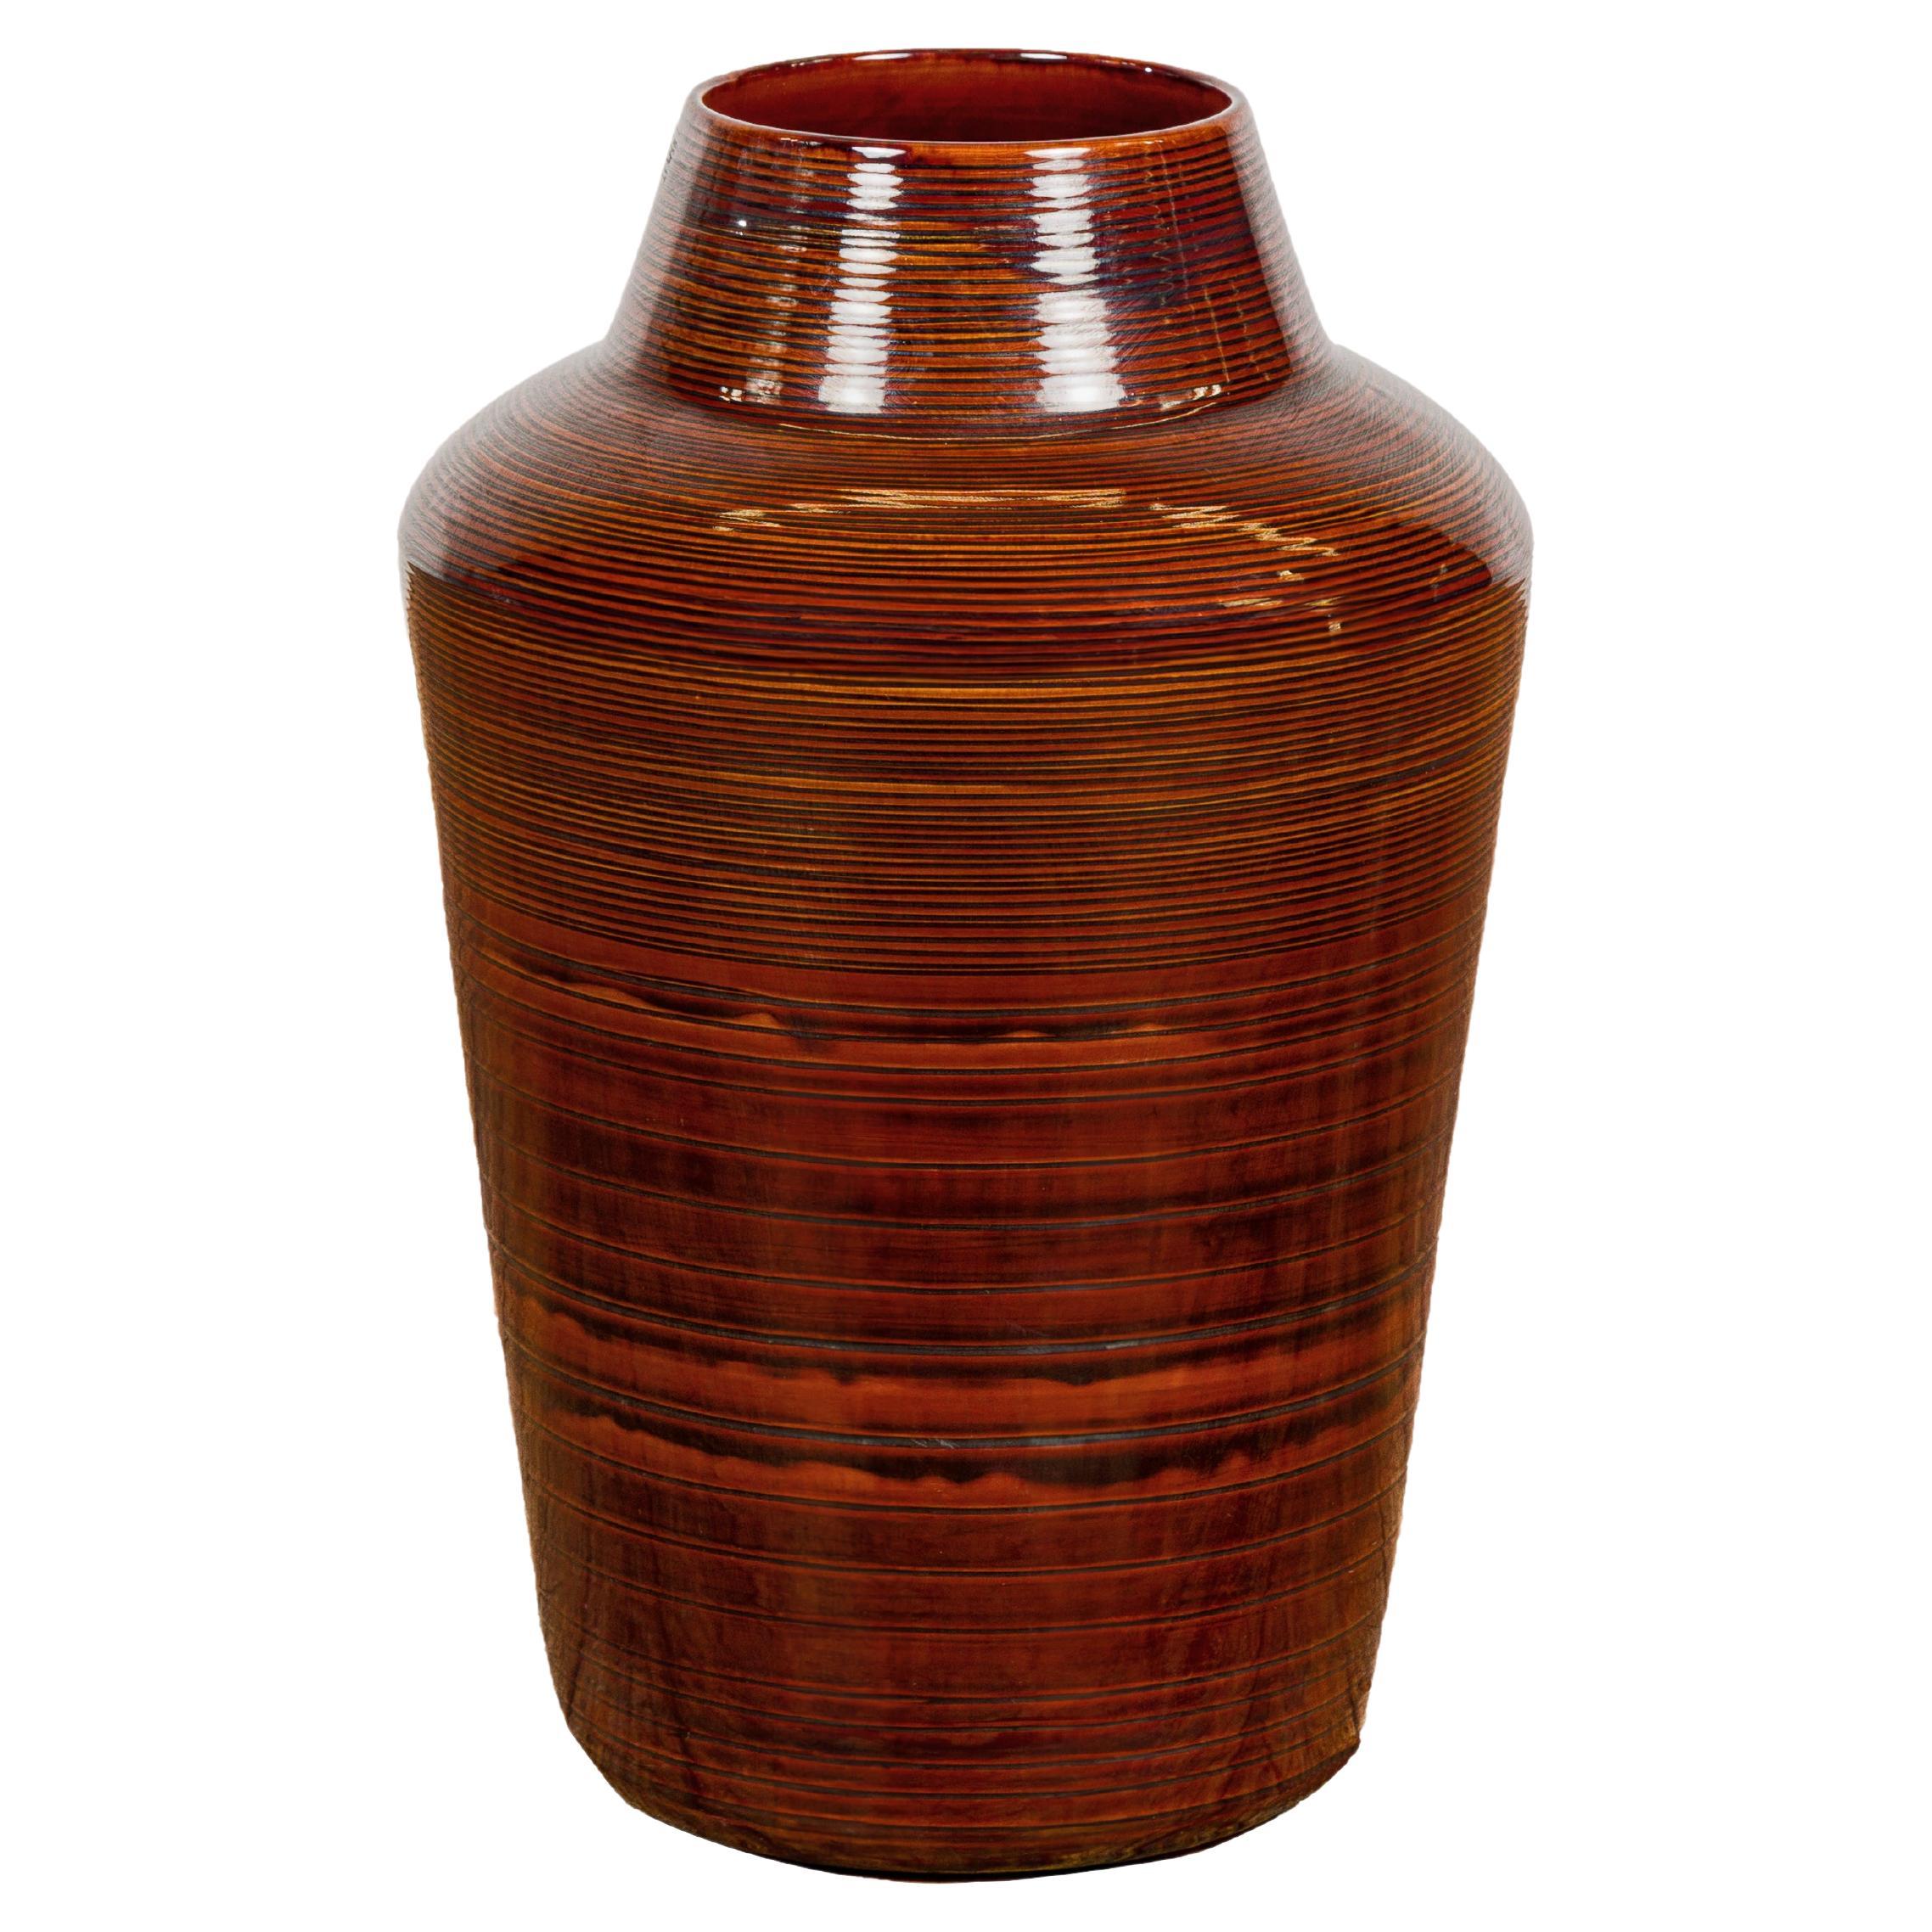 Artisan Brown Glaze Vase with Black Concentric Motifs and Tapering Lines